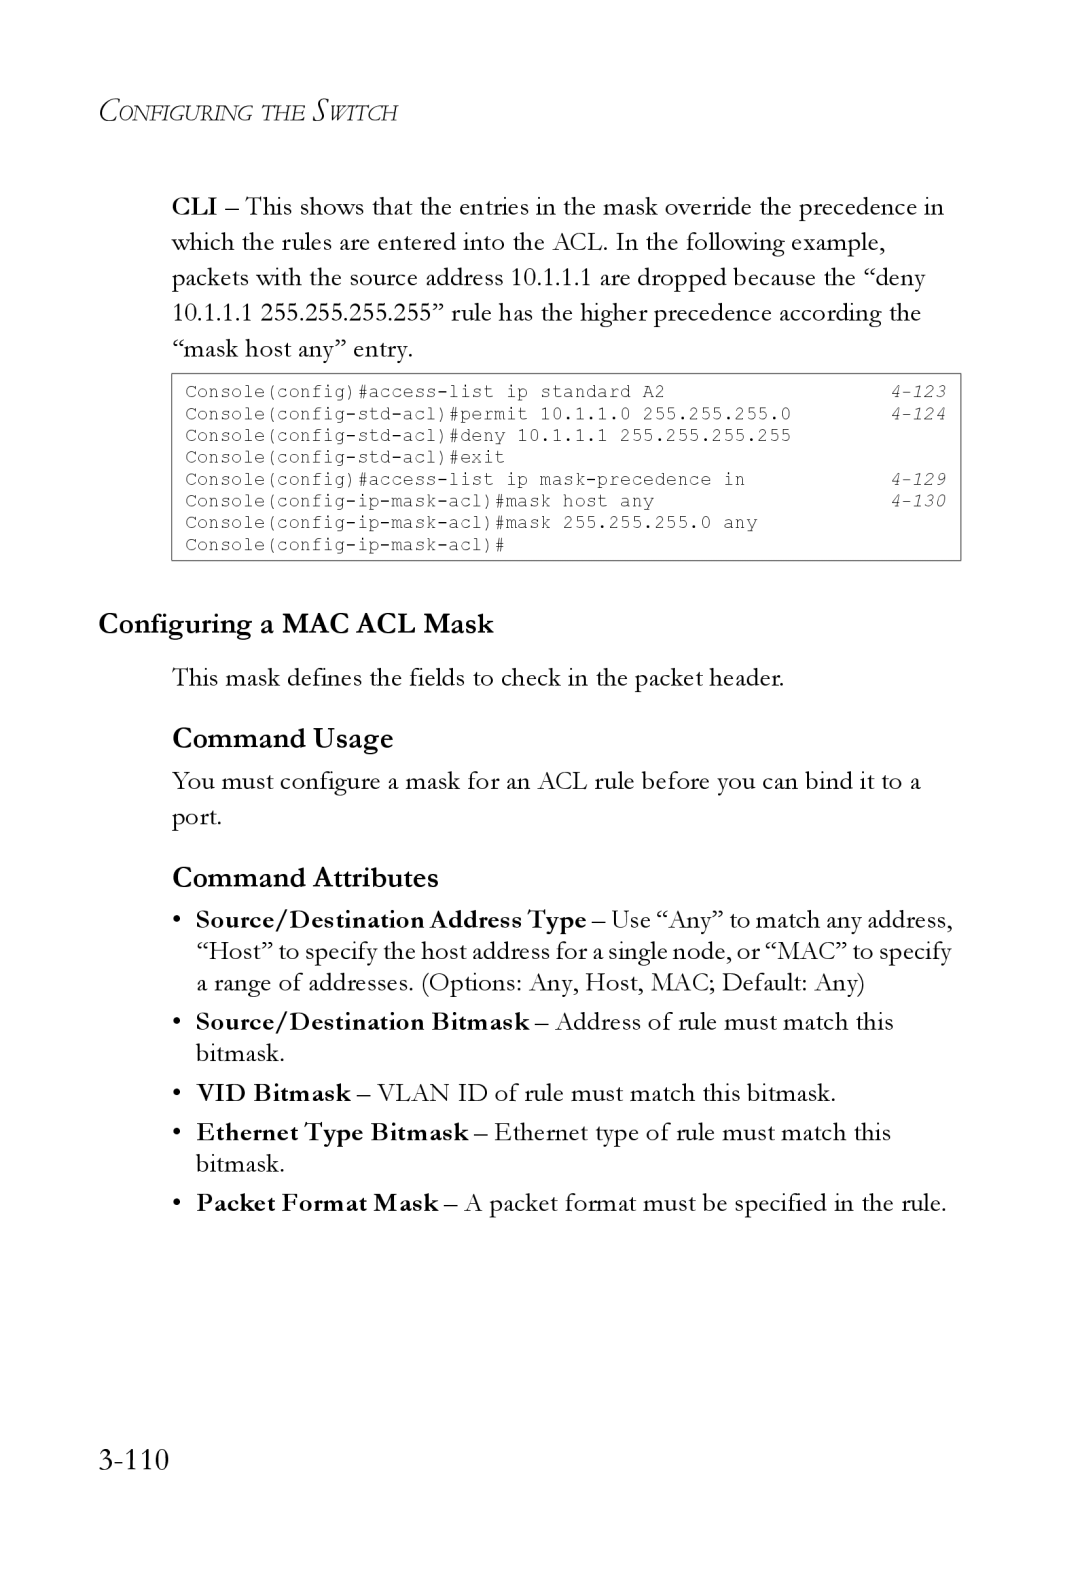 SMC Networks SMC6824M manual 110, Configuring a MAC ACL Mask, This mask defines the fields to check in the packet header 